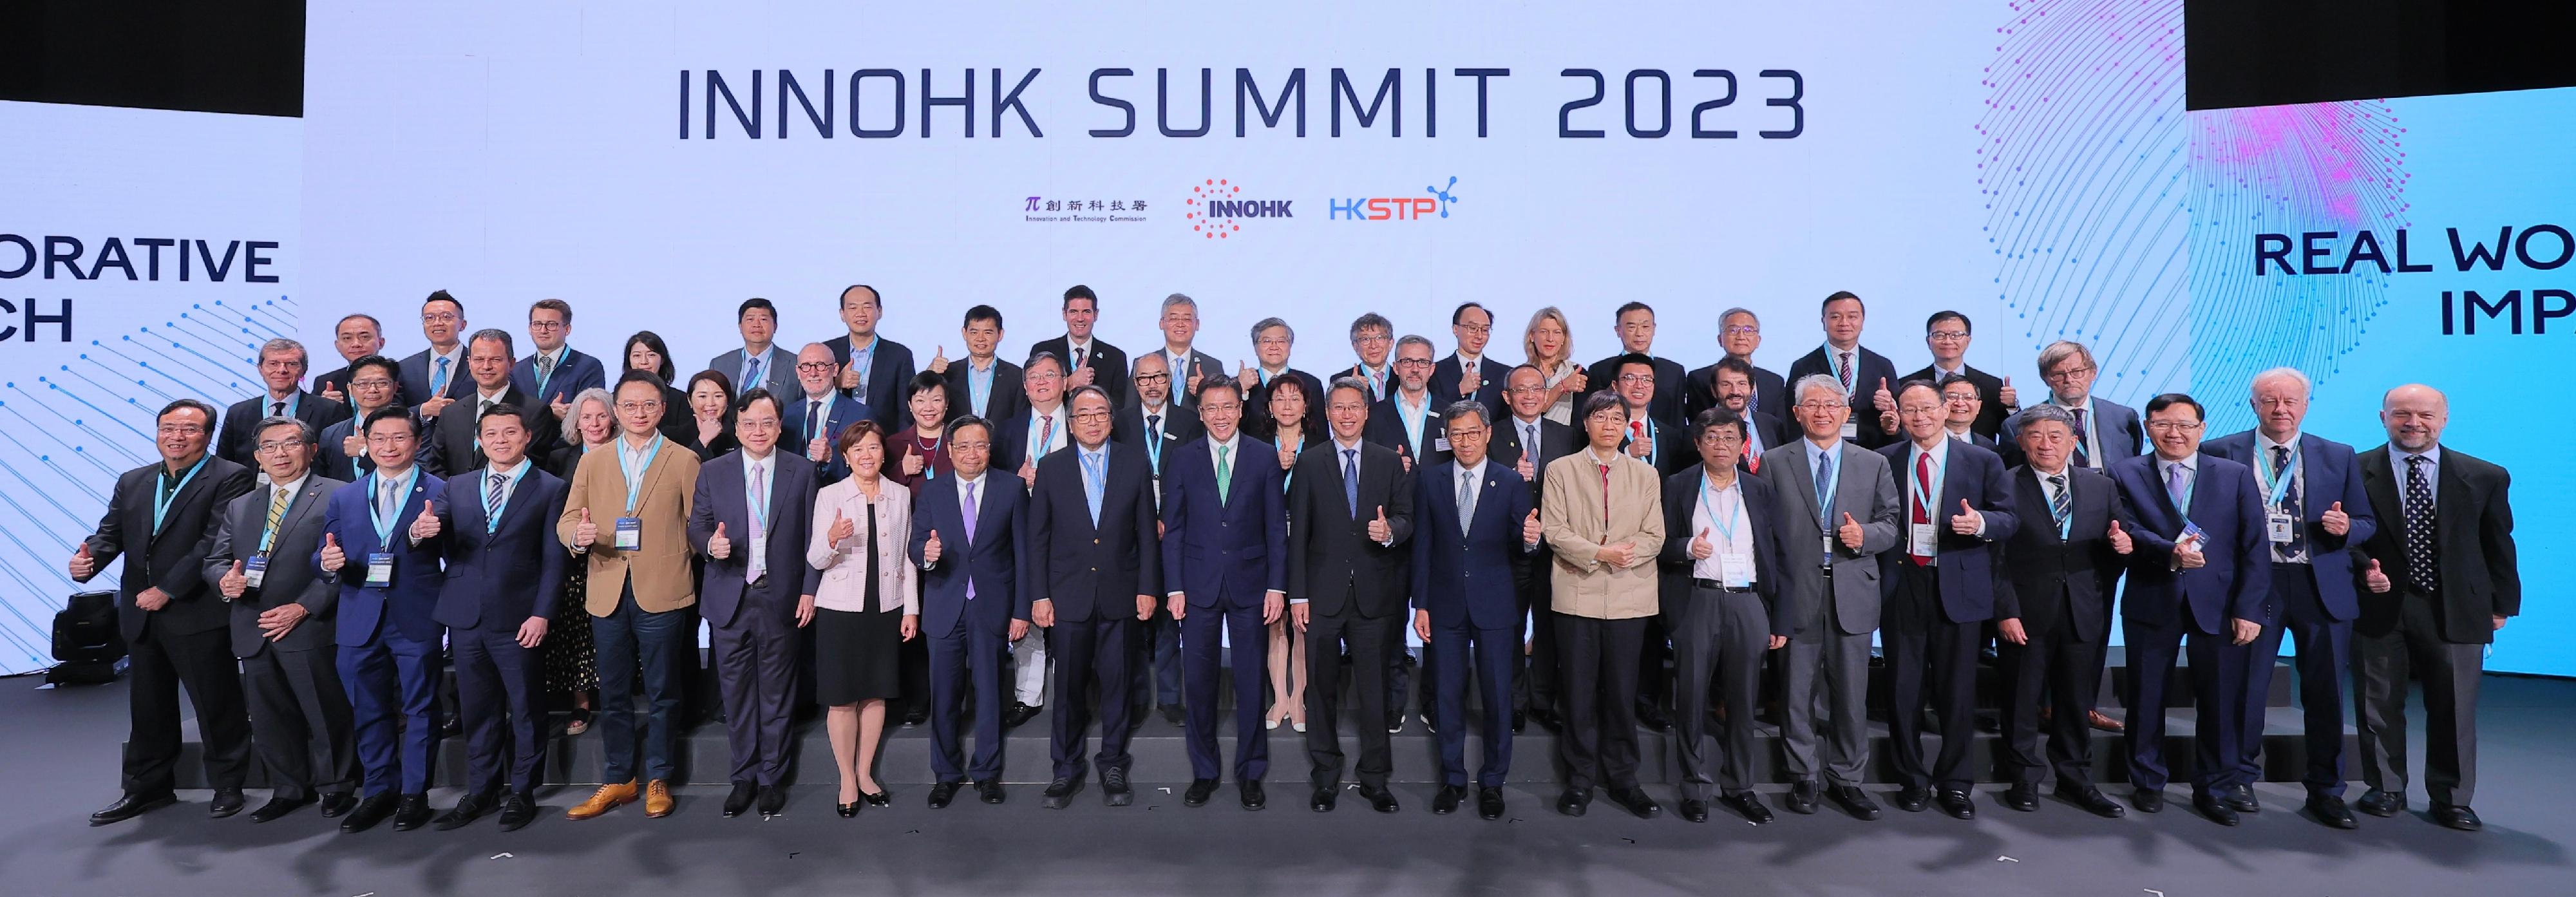 Organised by the Innovation and Technology Commission and the Hong Kong Science and Technology Parks Corporation (HKSTPC), the InnoHK Summit 2023 was held at Hong Kong Science Park today (December 6). Photo shows the Secretary for Innovation, Technology and Industry, Professor Sun Dong (front row, 10th left); the Founding President of the Hong Kong Academy of Sciences and Chairman of the InnoHK Steering Committee, Professor Tsui Lap-chee (front row, ninth left); the Permanent Secretary for Innovation, Technology and Industry, Mr Eddie Mak (front row, 10th right); the Commissioner for Innovation and Technology, Mr Ivan Lee (front row, eighth left); and the Chief Executive Officer of the HKSTPC, Mr Albert Wong (front row, ninth right), with directors of InnoHK research centres and their non-local collaborators.
